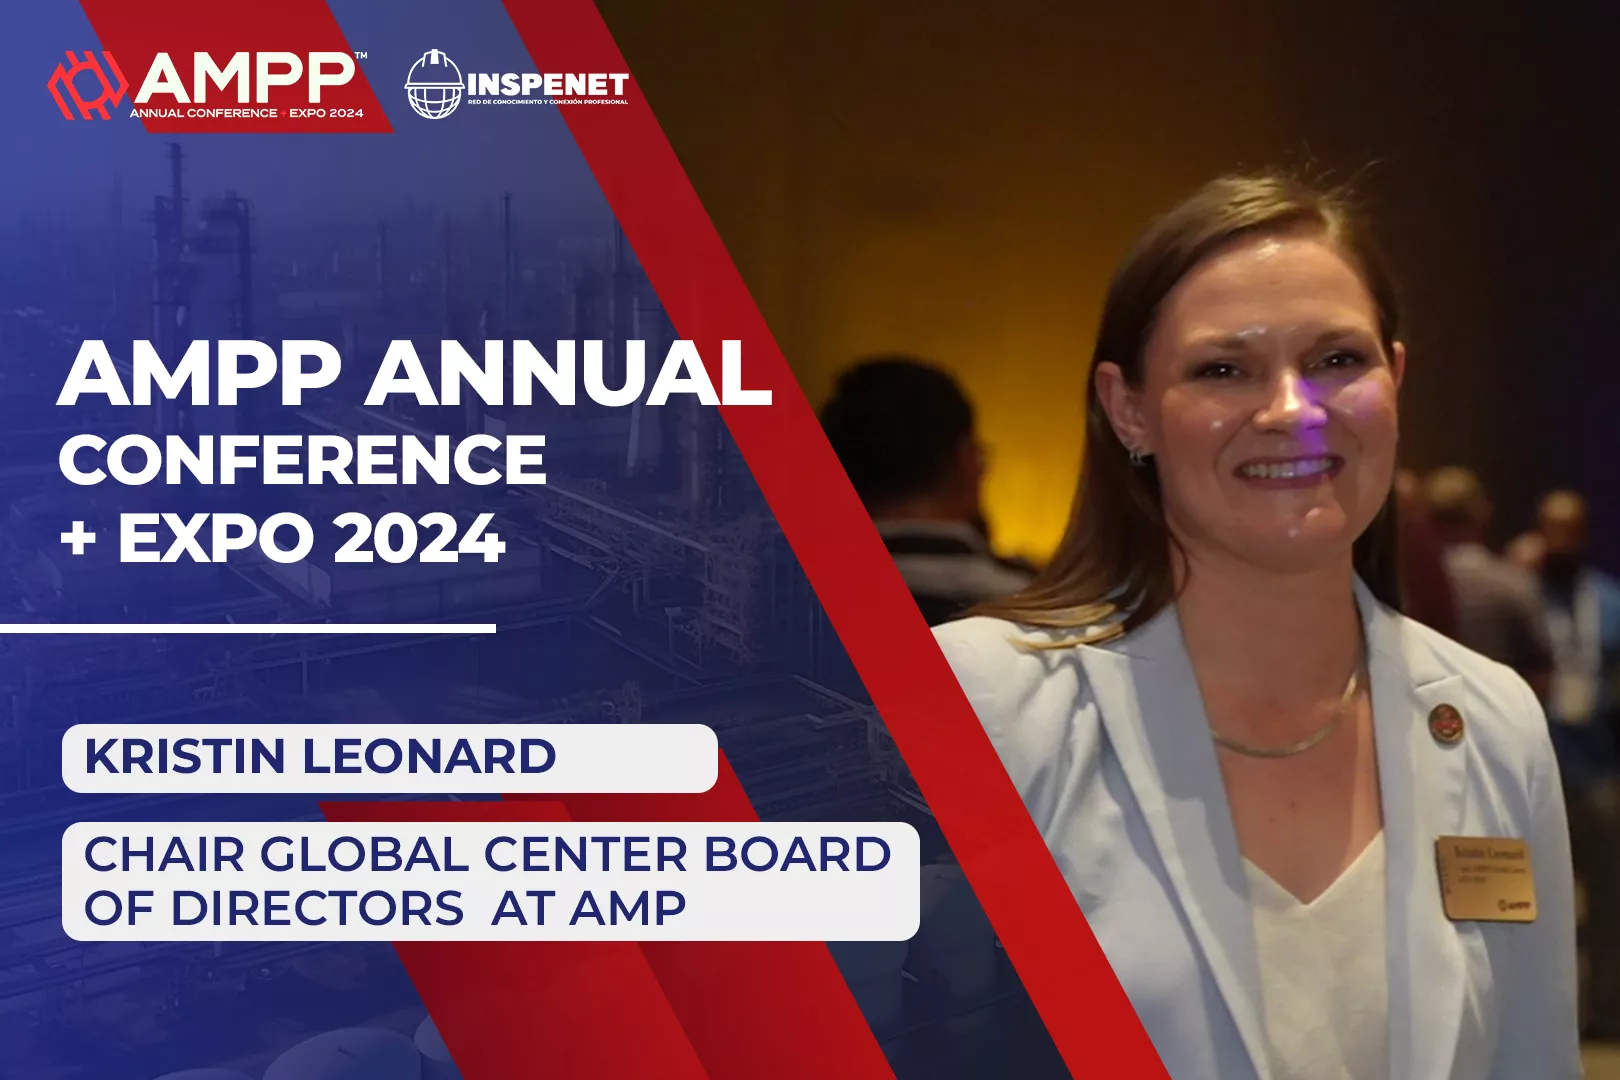 AMPP 2024 Global Innovation Meets in New Orleans